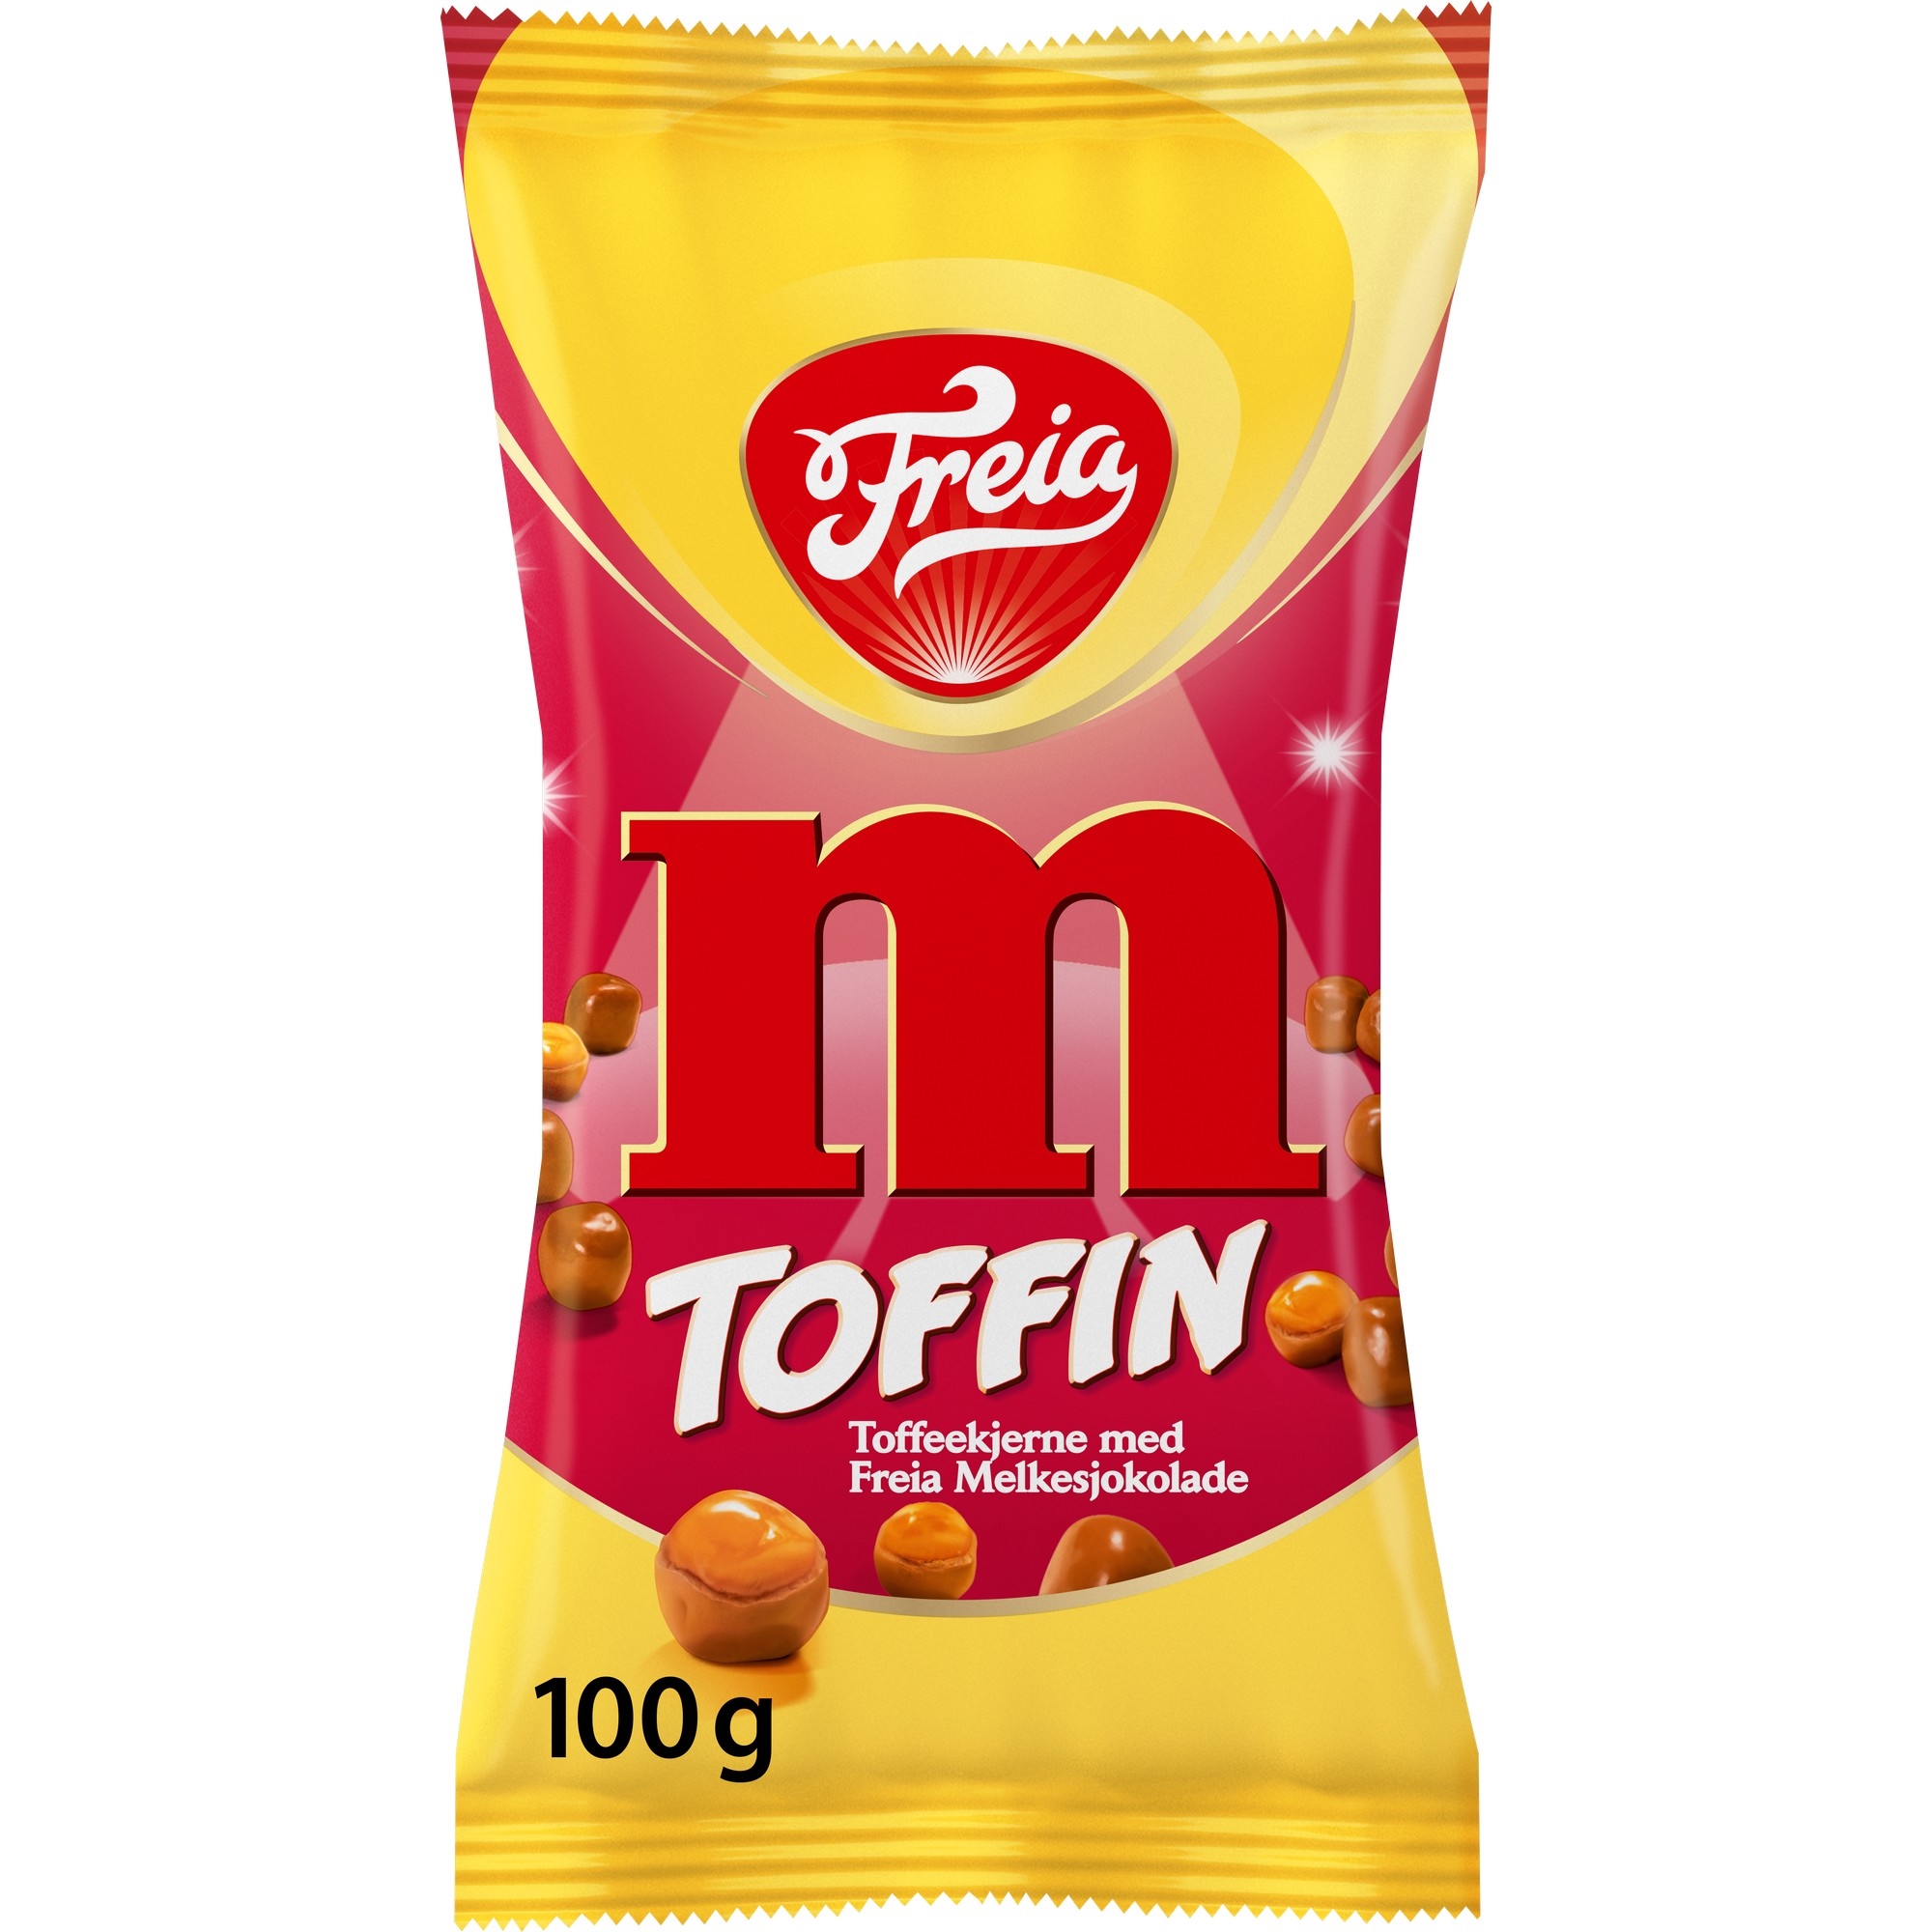 Toffin classic pose 90g